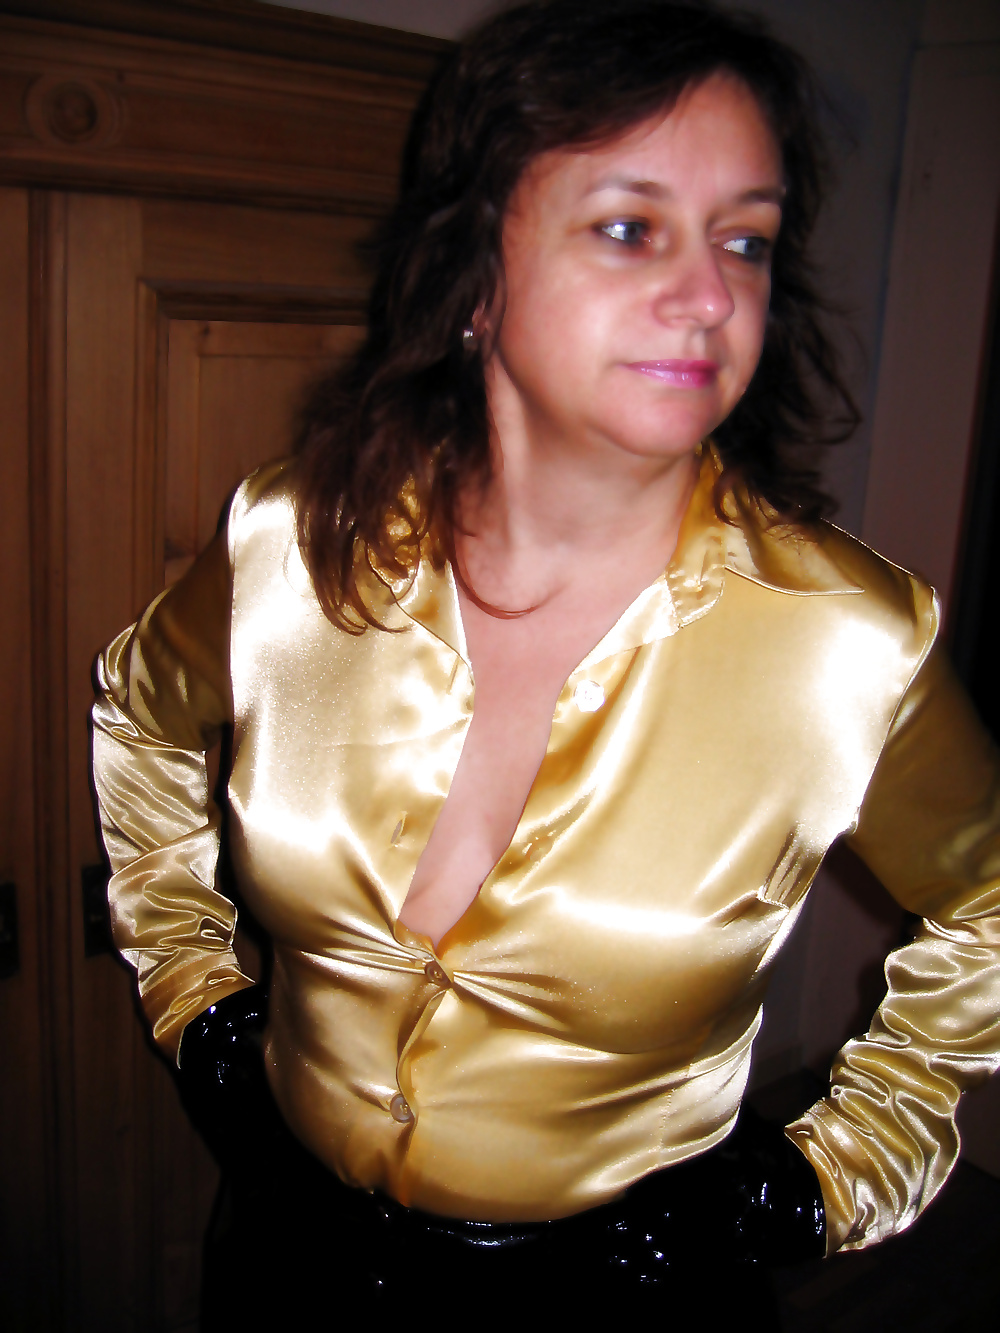 Hairy MILF in PVC Lingerie and Satin Blouse #33212140